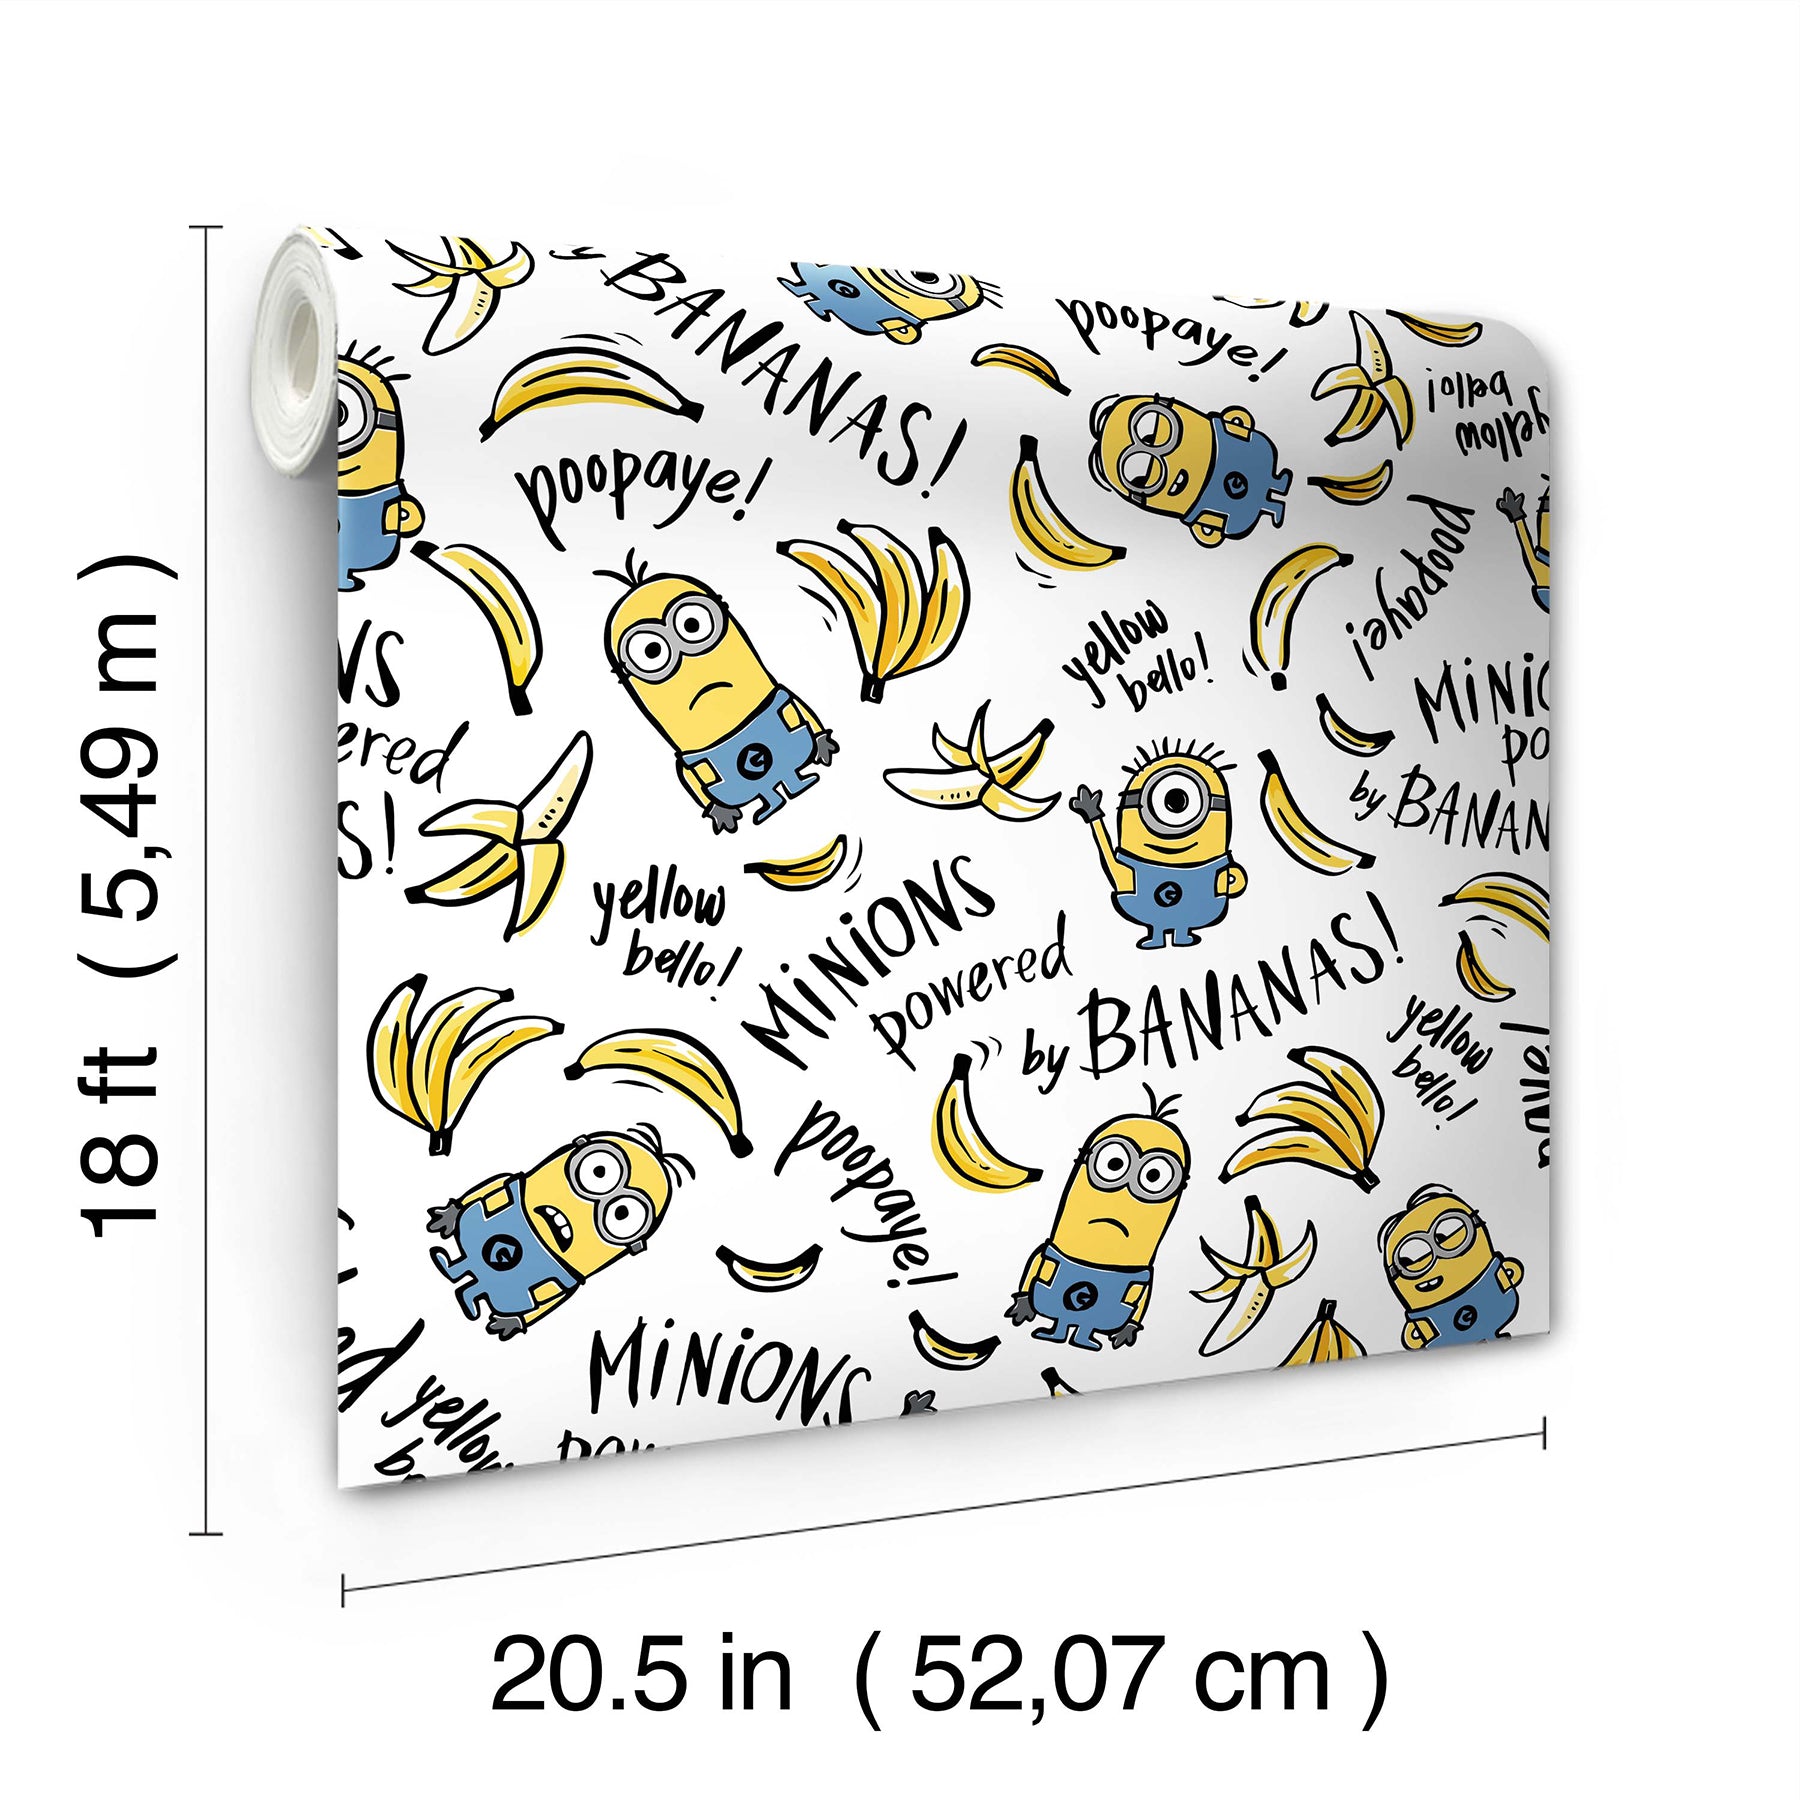 Minions Powered by Bananas Peel and Stick Wallpaper Peel and Stick Wallpaper RoomMates Decor   